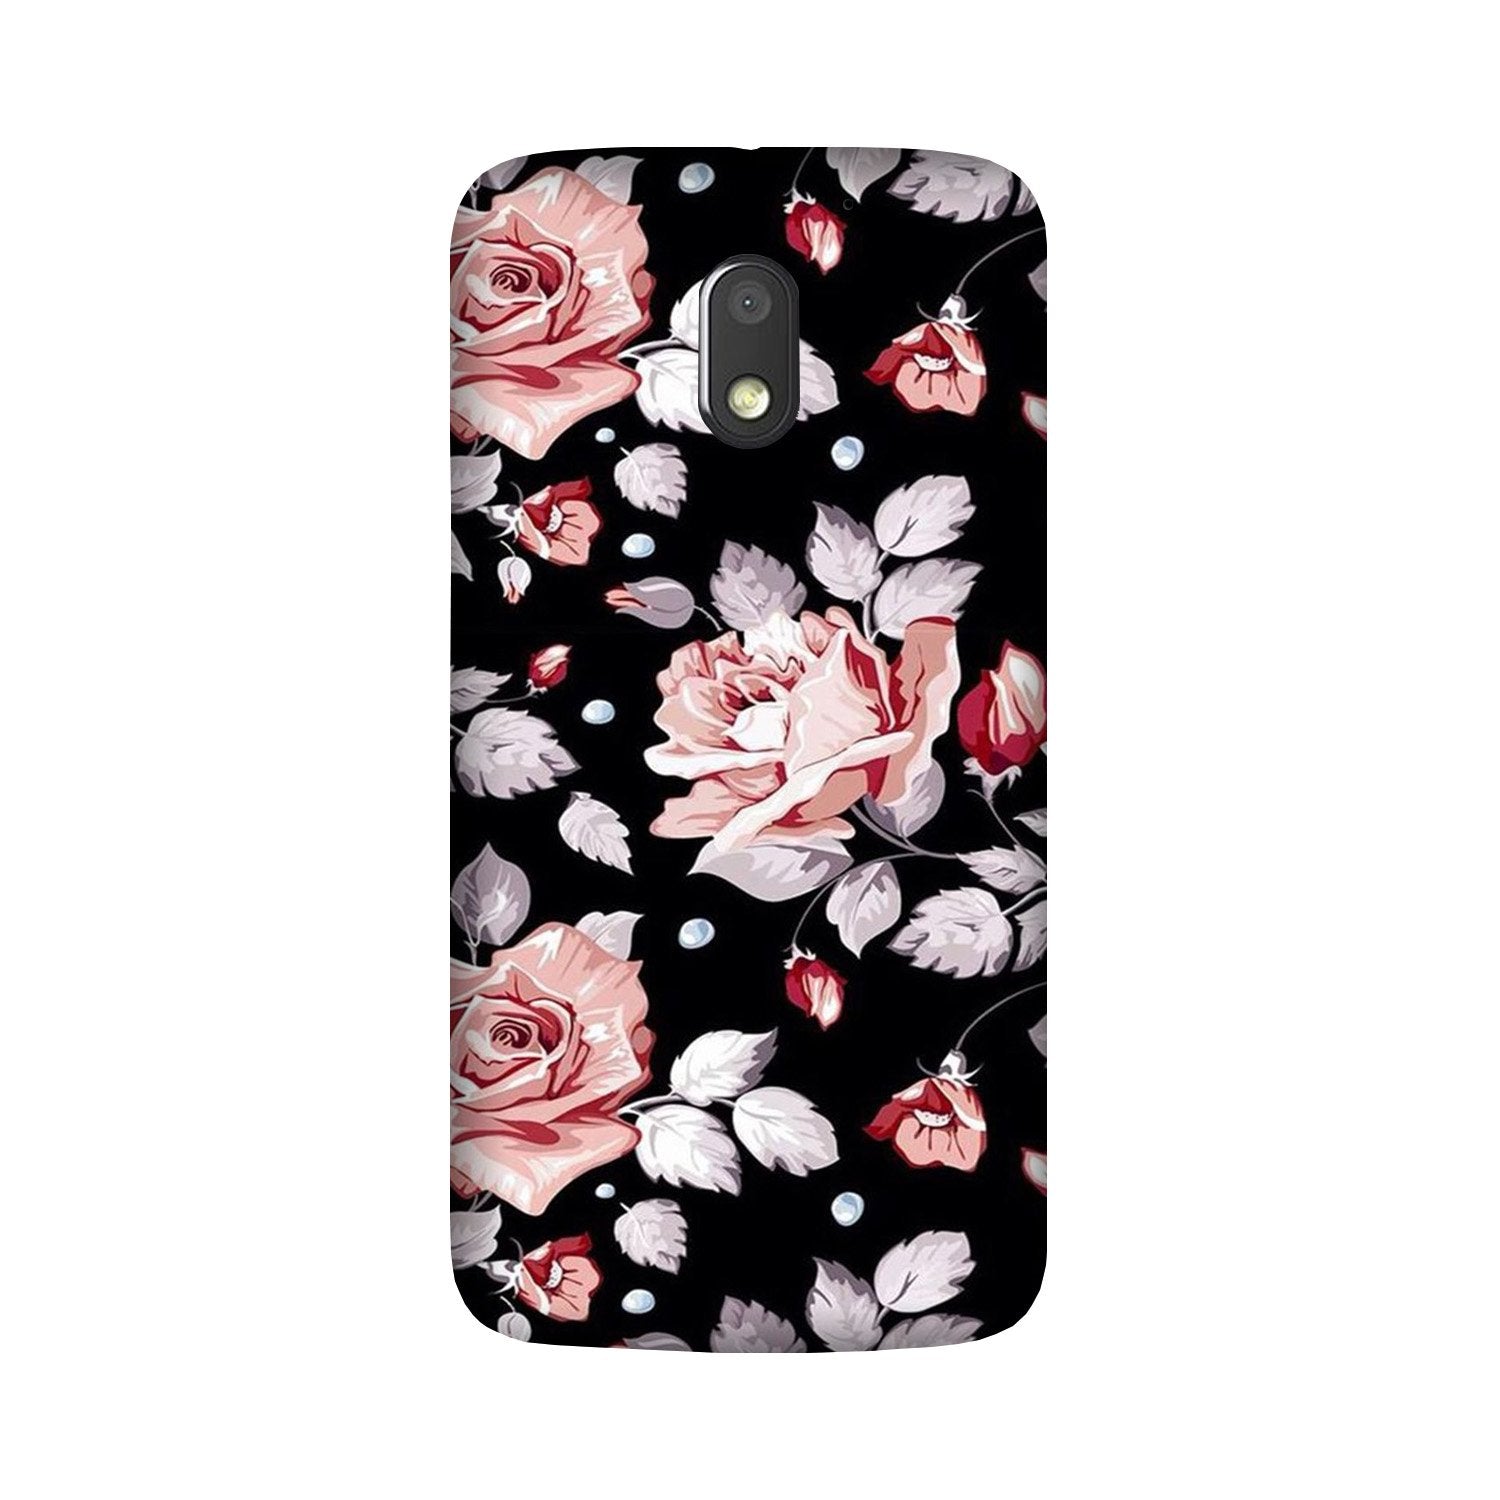 Pink rose Case for Moto G4 Play